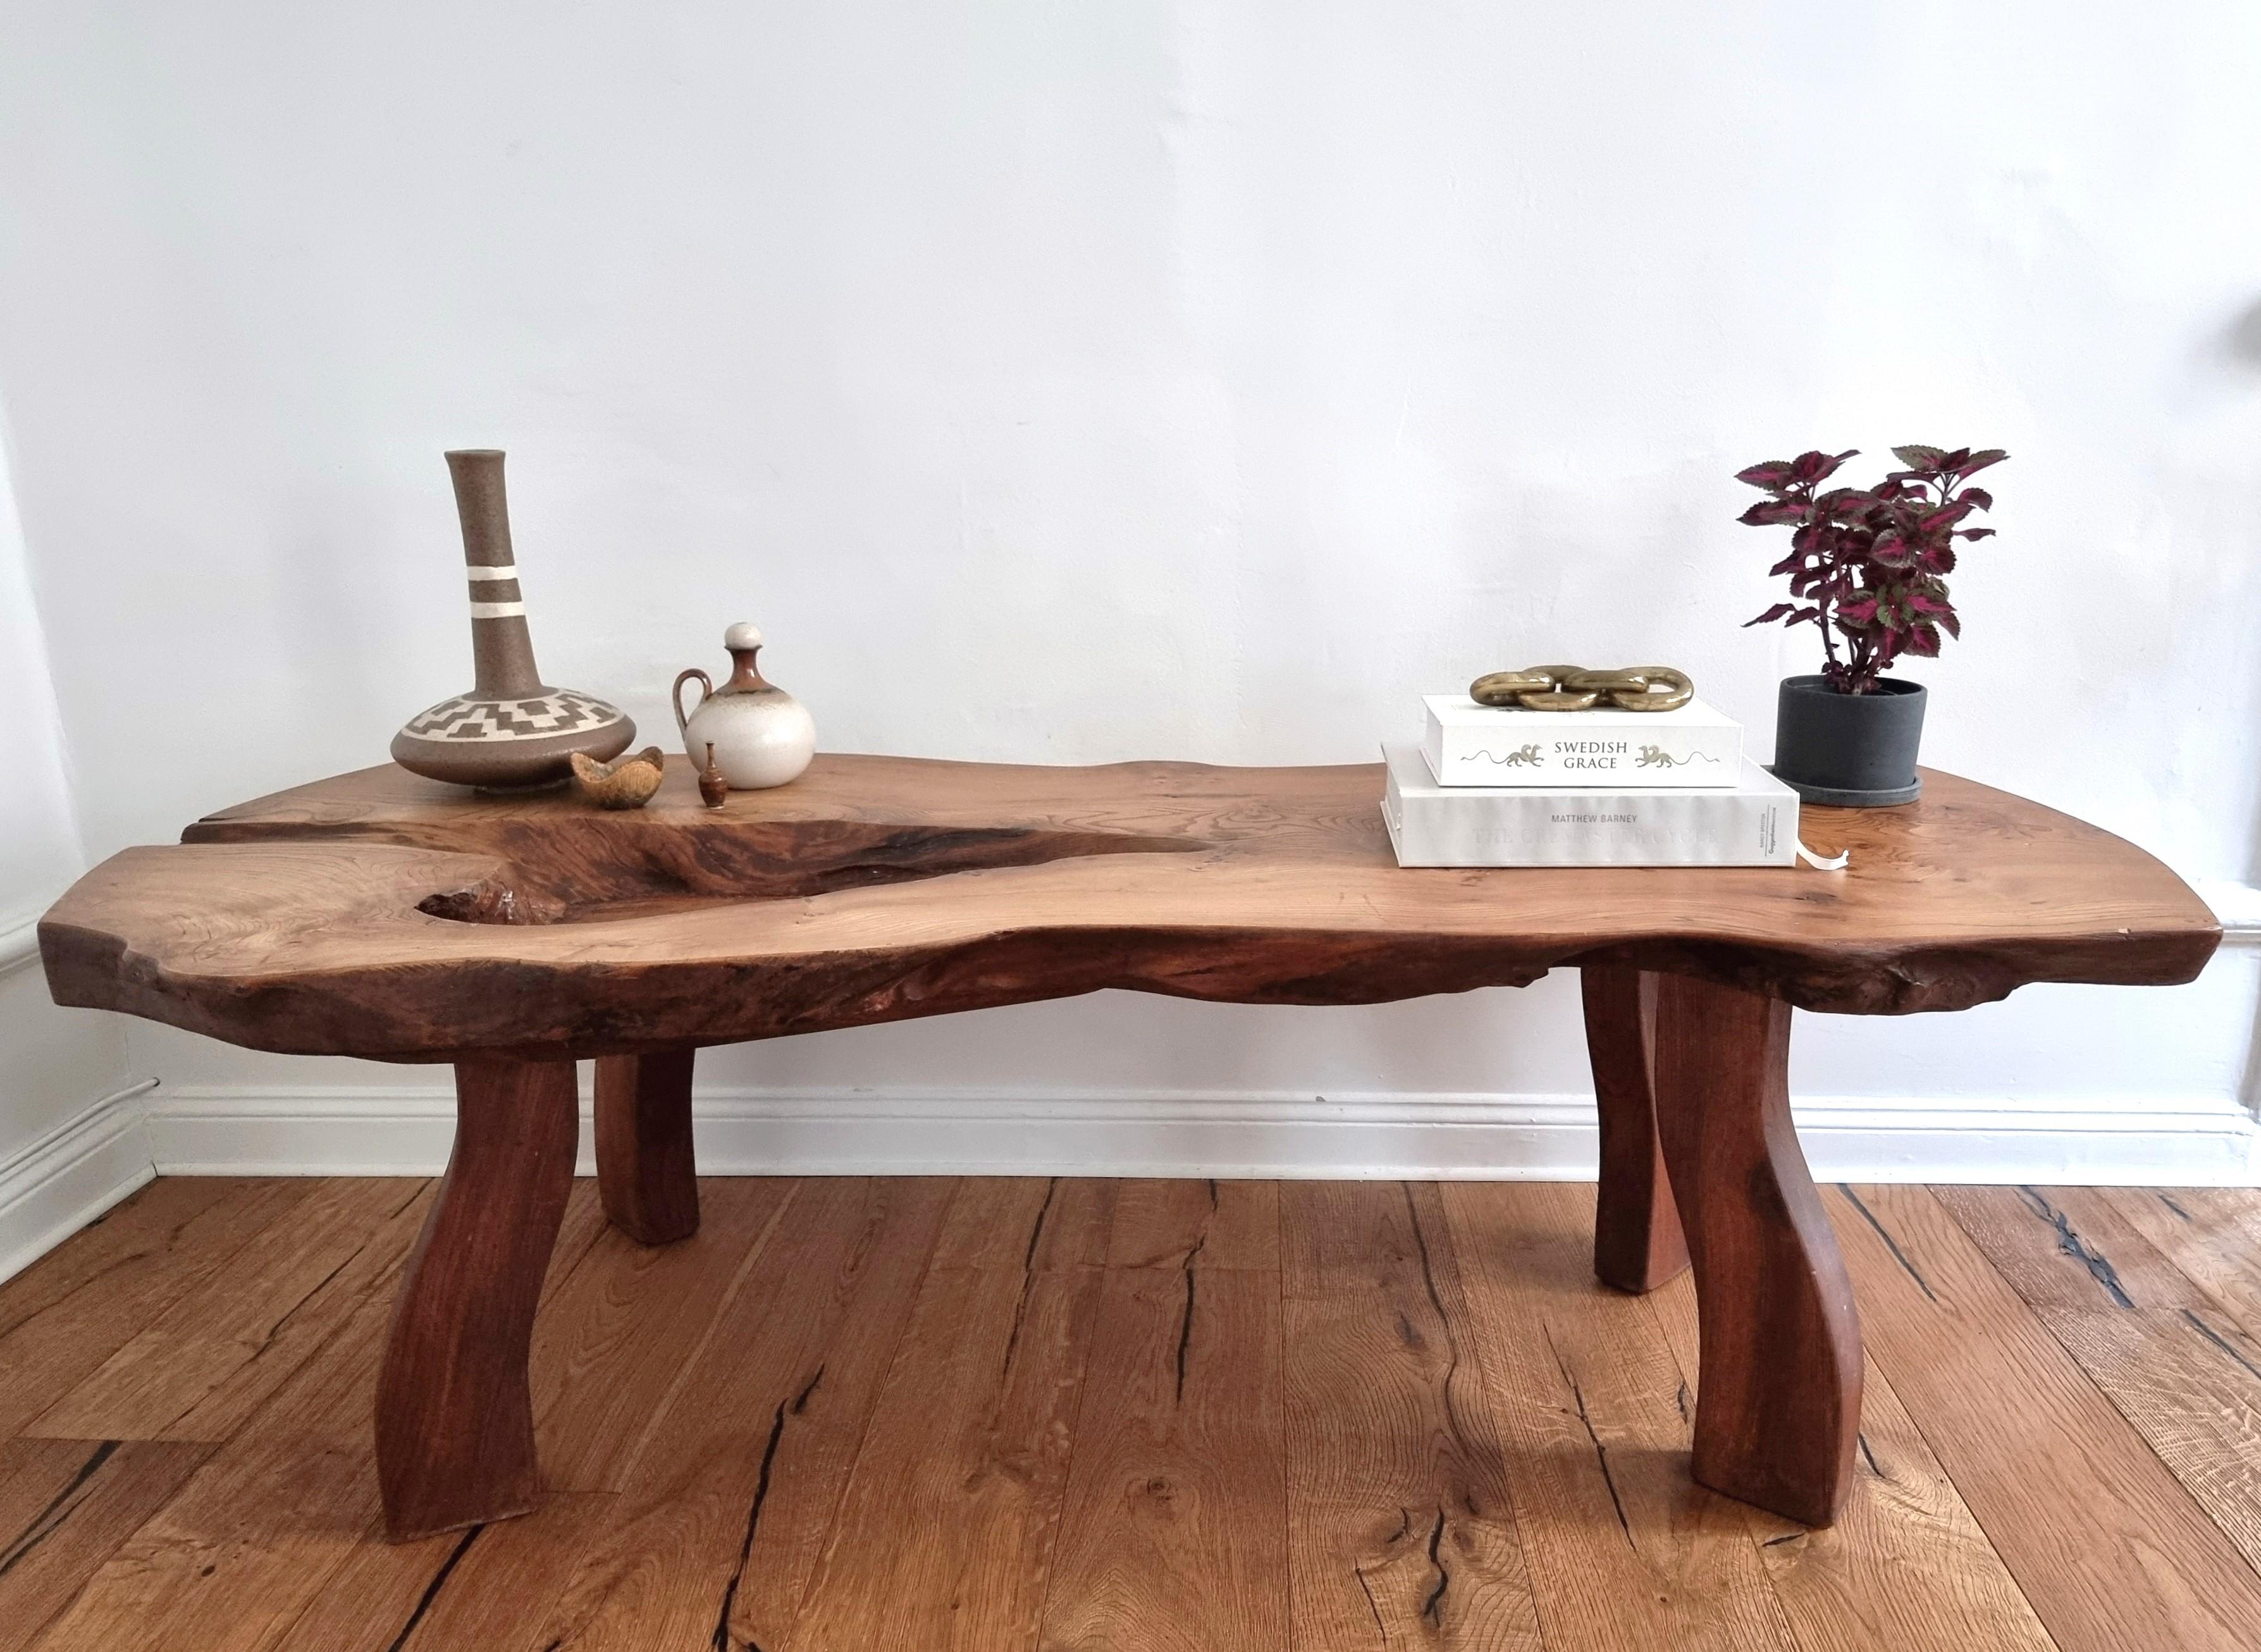 Large coffe table / bench / naturetable with bowl by Christer Beijbom, son of designer Carl-Axel Beijbom (1909-1971). Made in massive elm. Signed beneath the top. Simlingegård 1974, Sweden. 

These tables were only made on request, from early